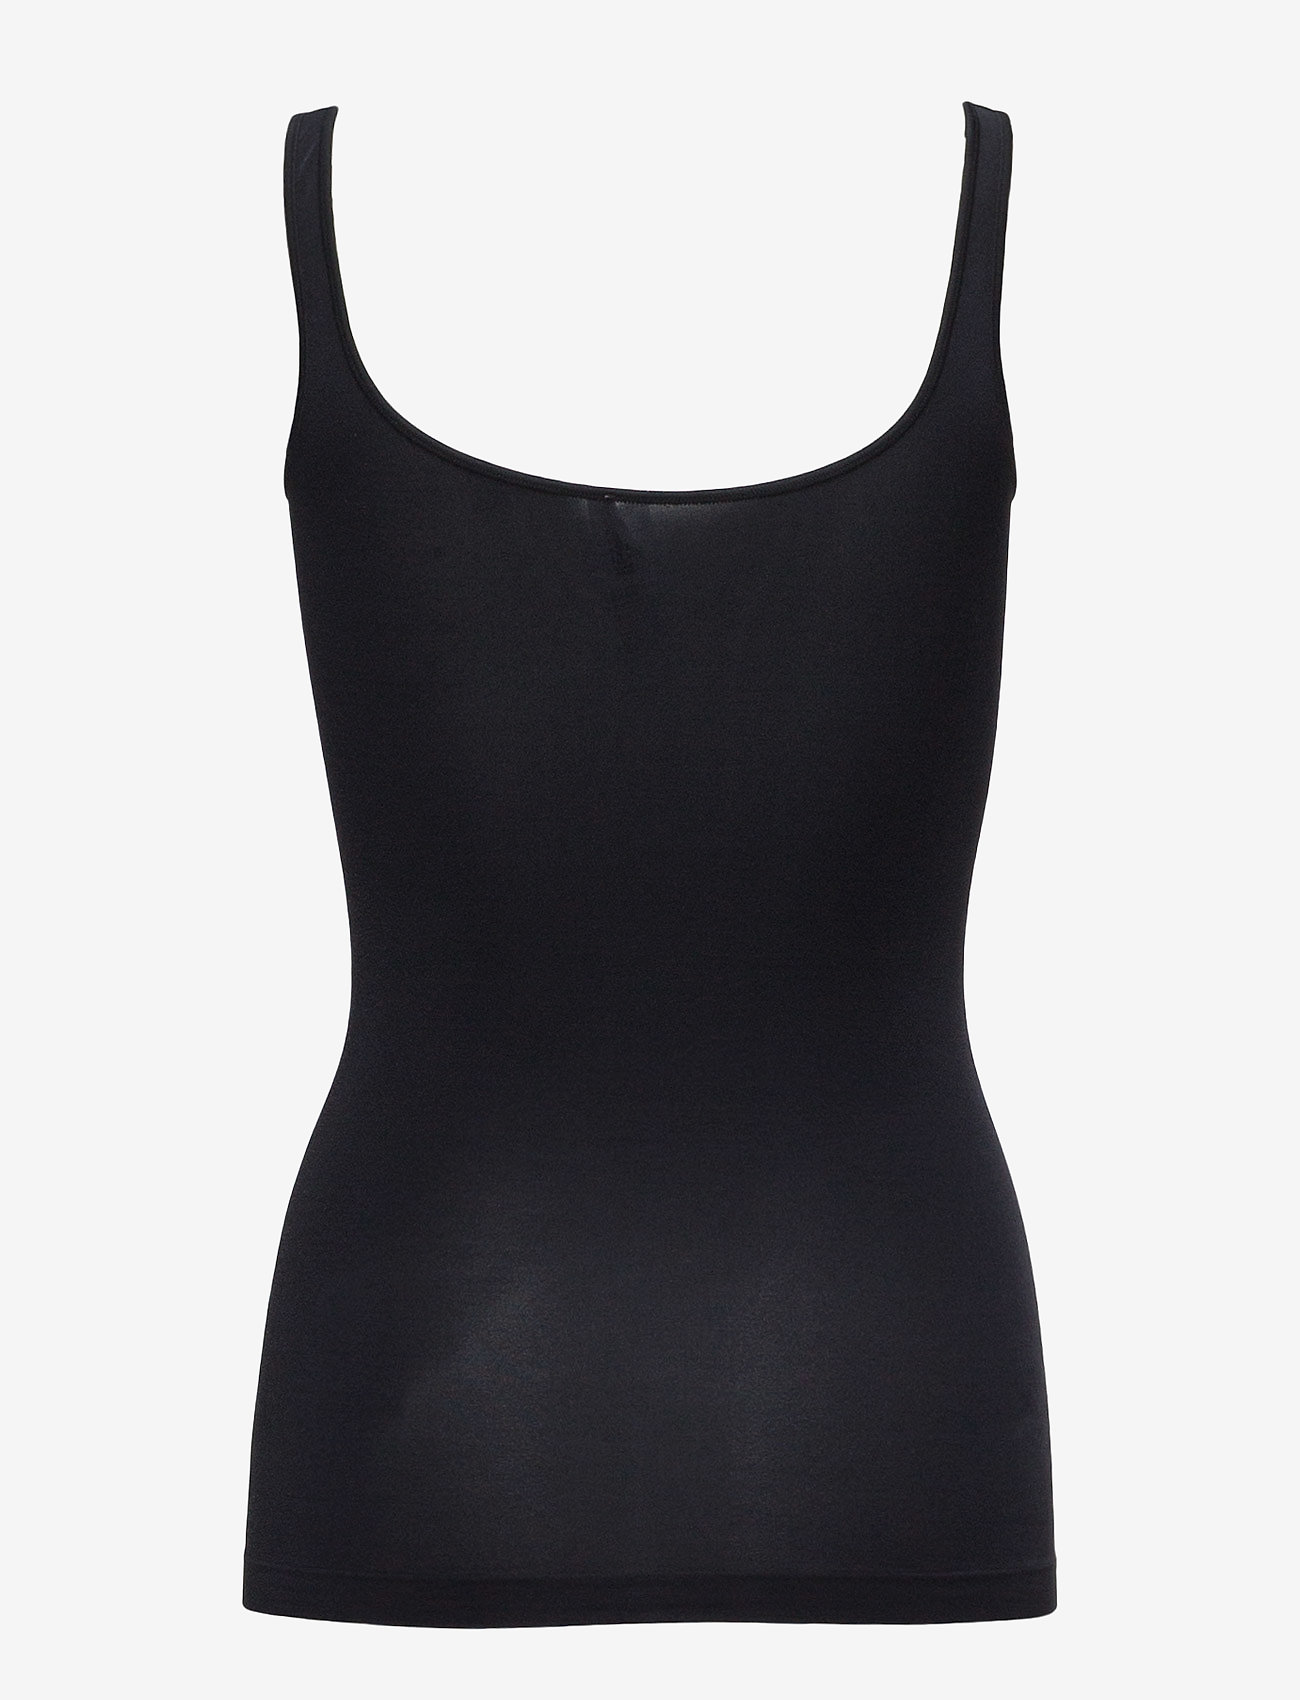 Wolford Ind. Nature Top - Shapewear | Boozt.com